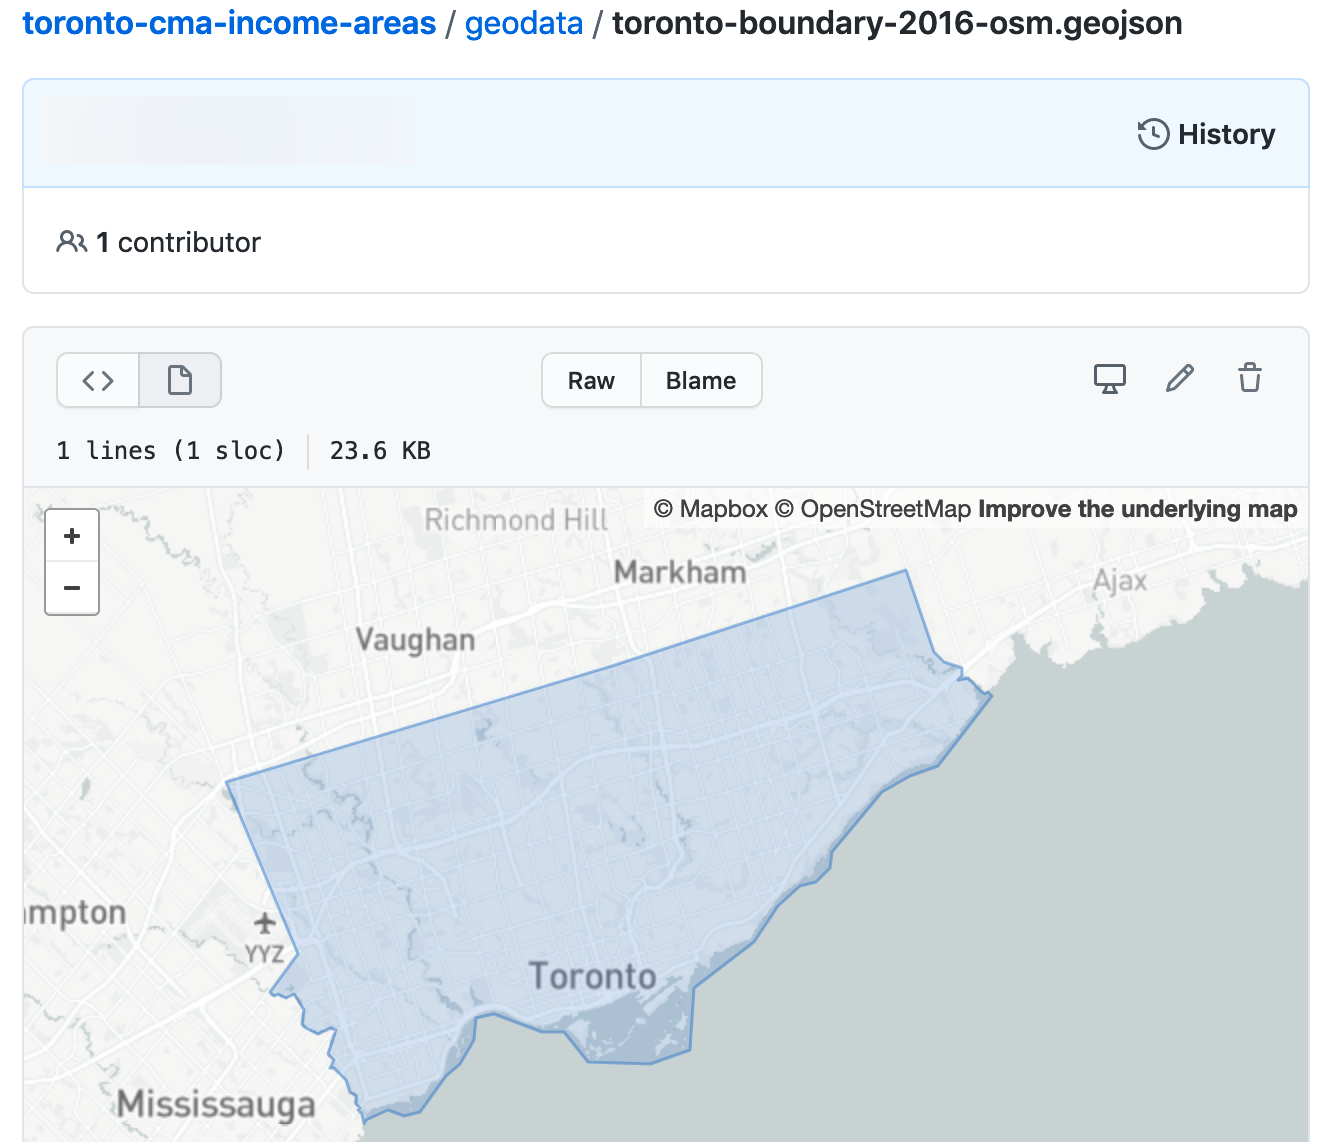 GitHub repositories automatically show a map preview for GeoJSON files.